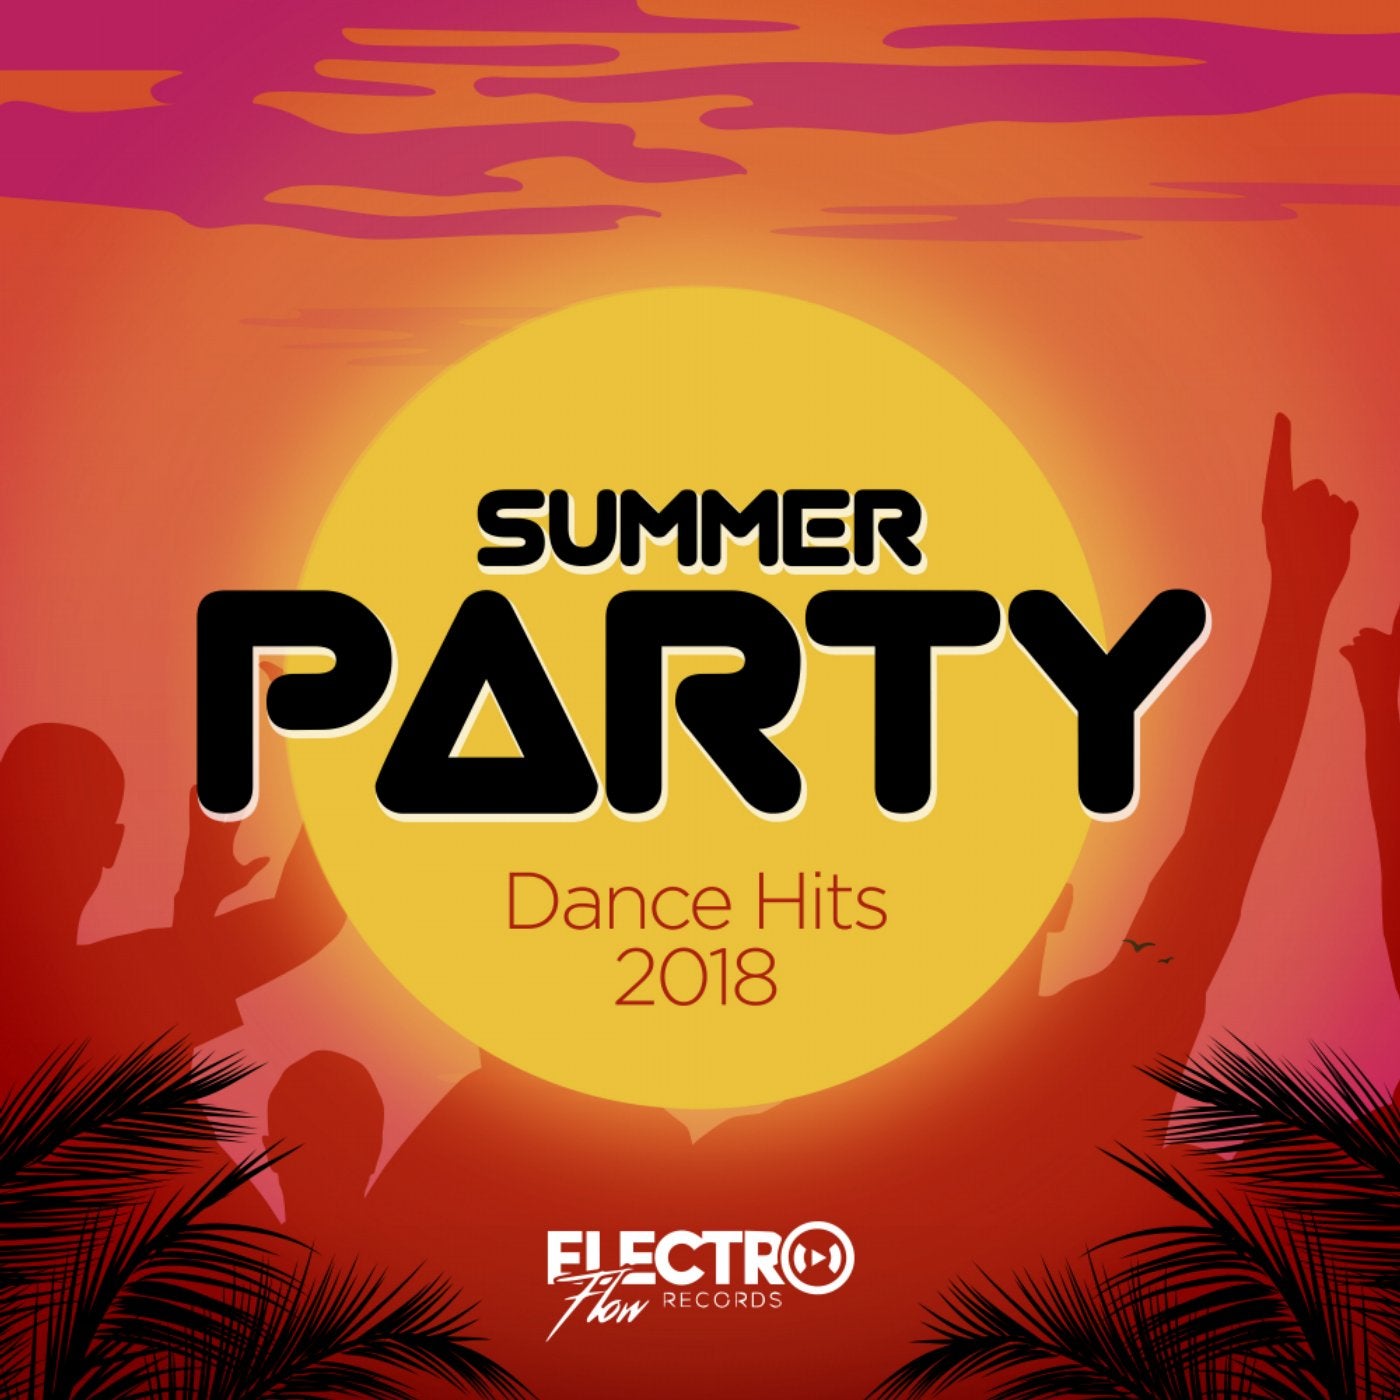 Summer Party: Dance Hits 2018